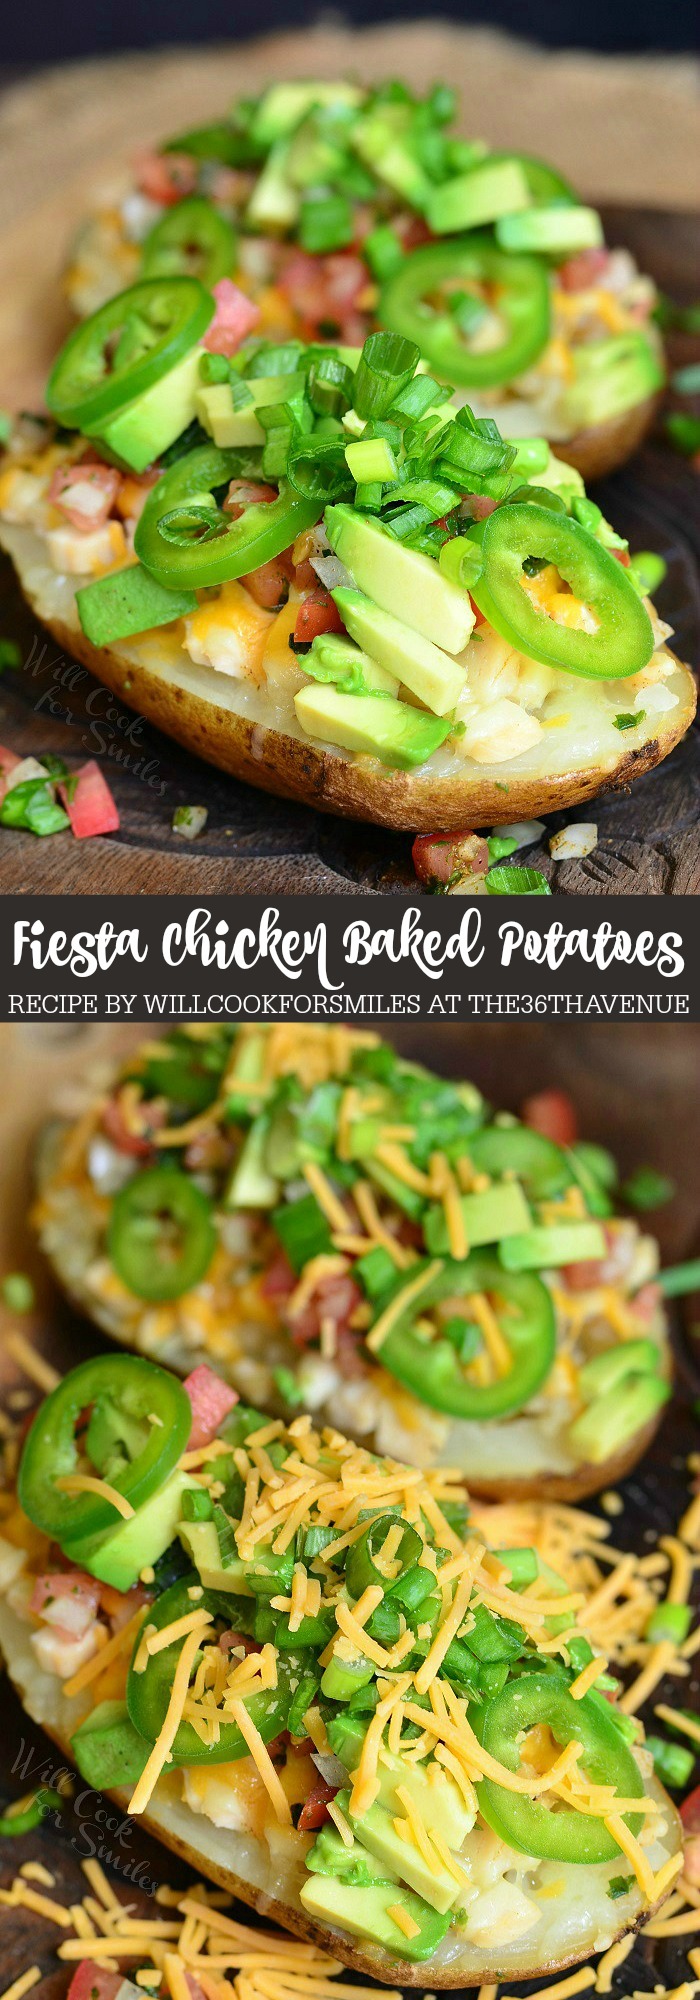 Baked potatoes stuffed with chicken, cheese, pico de gallo, avocado and jalapeños. These Twice Baked Potatoes are delicious and perfect for any day of the week.